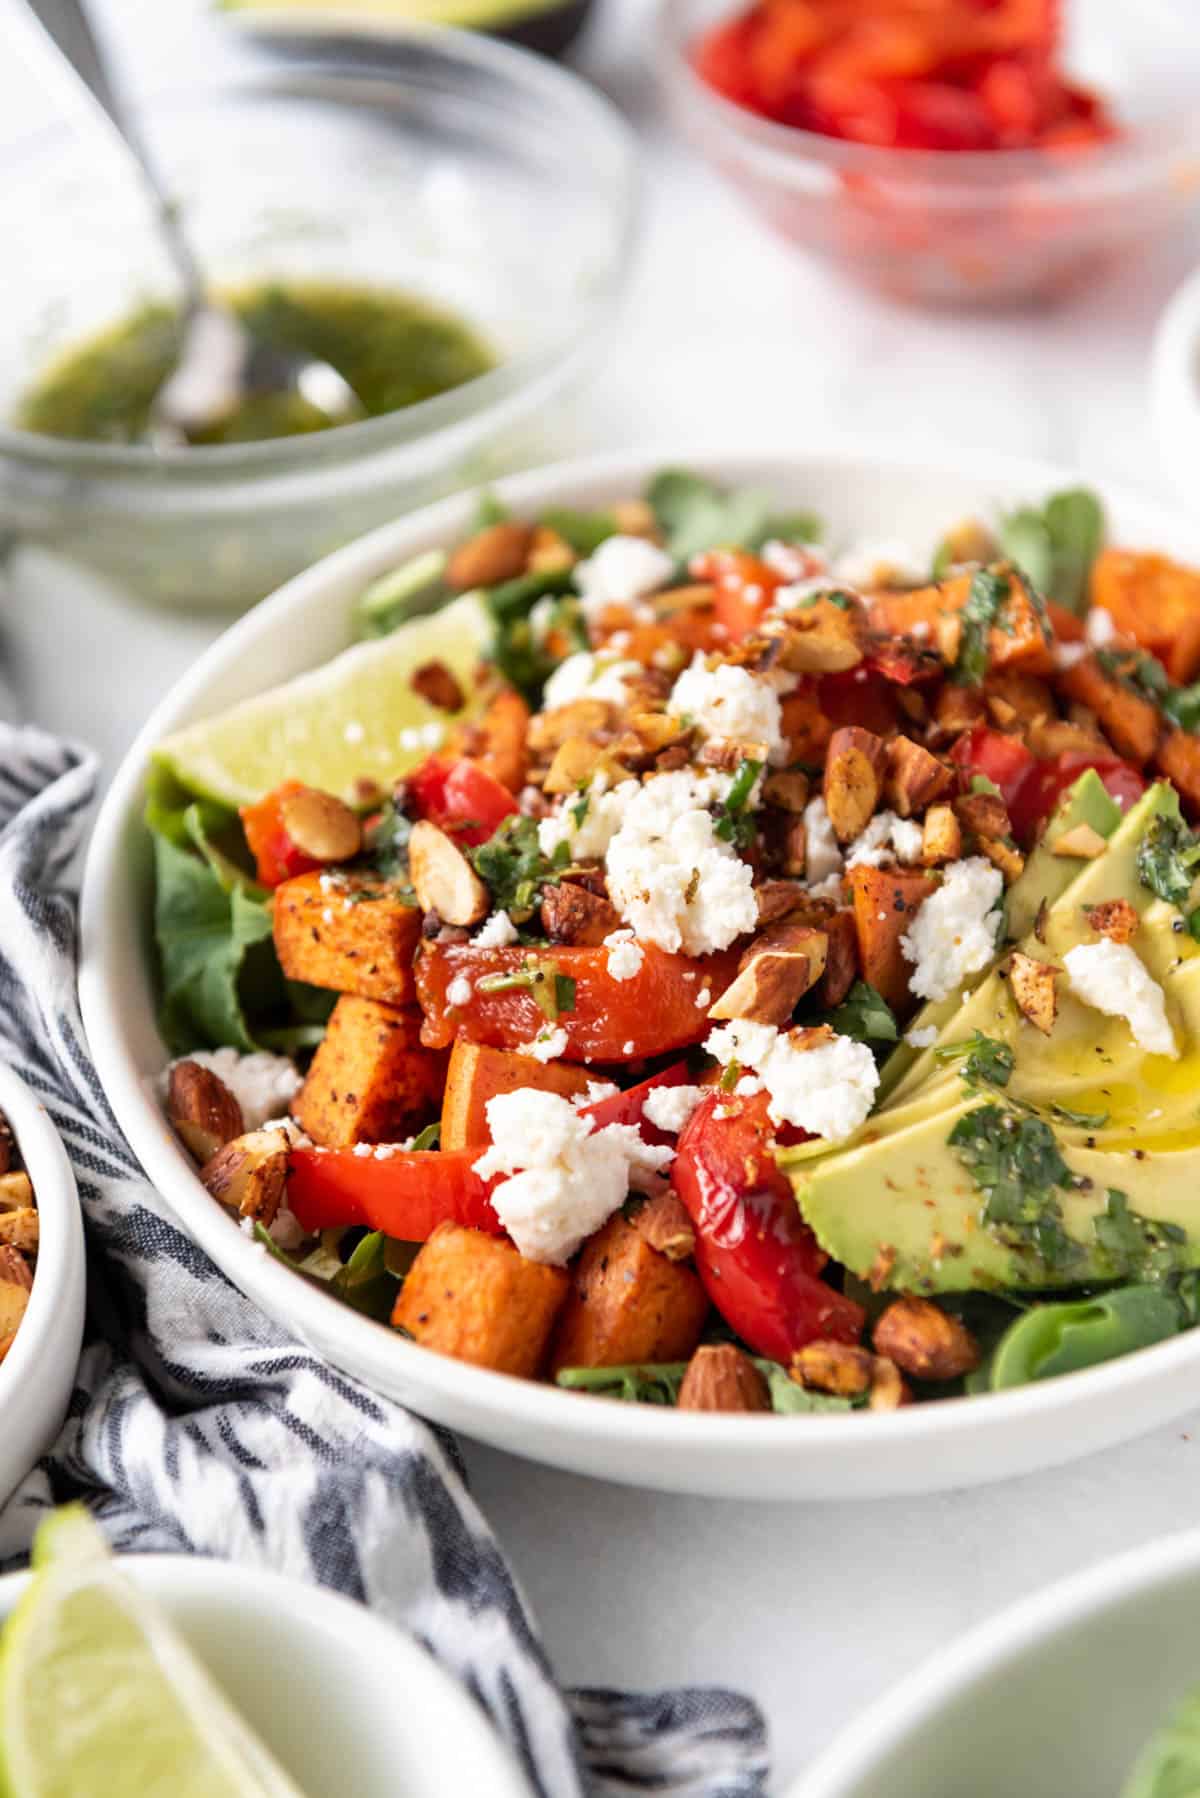 A buddha bowl with grains, greens, proteins, and queso fresco on top.